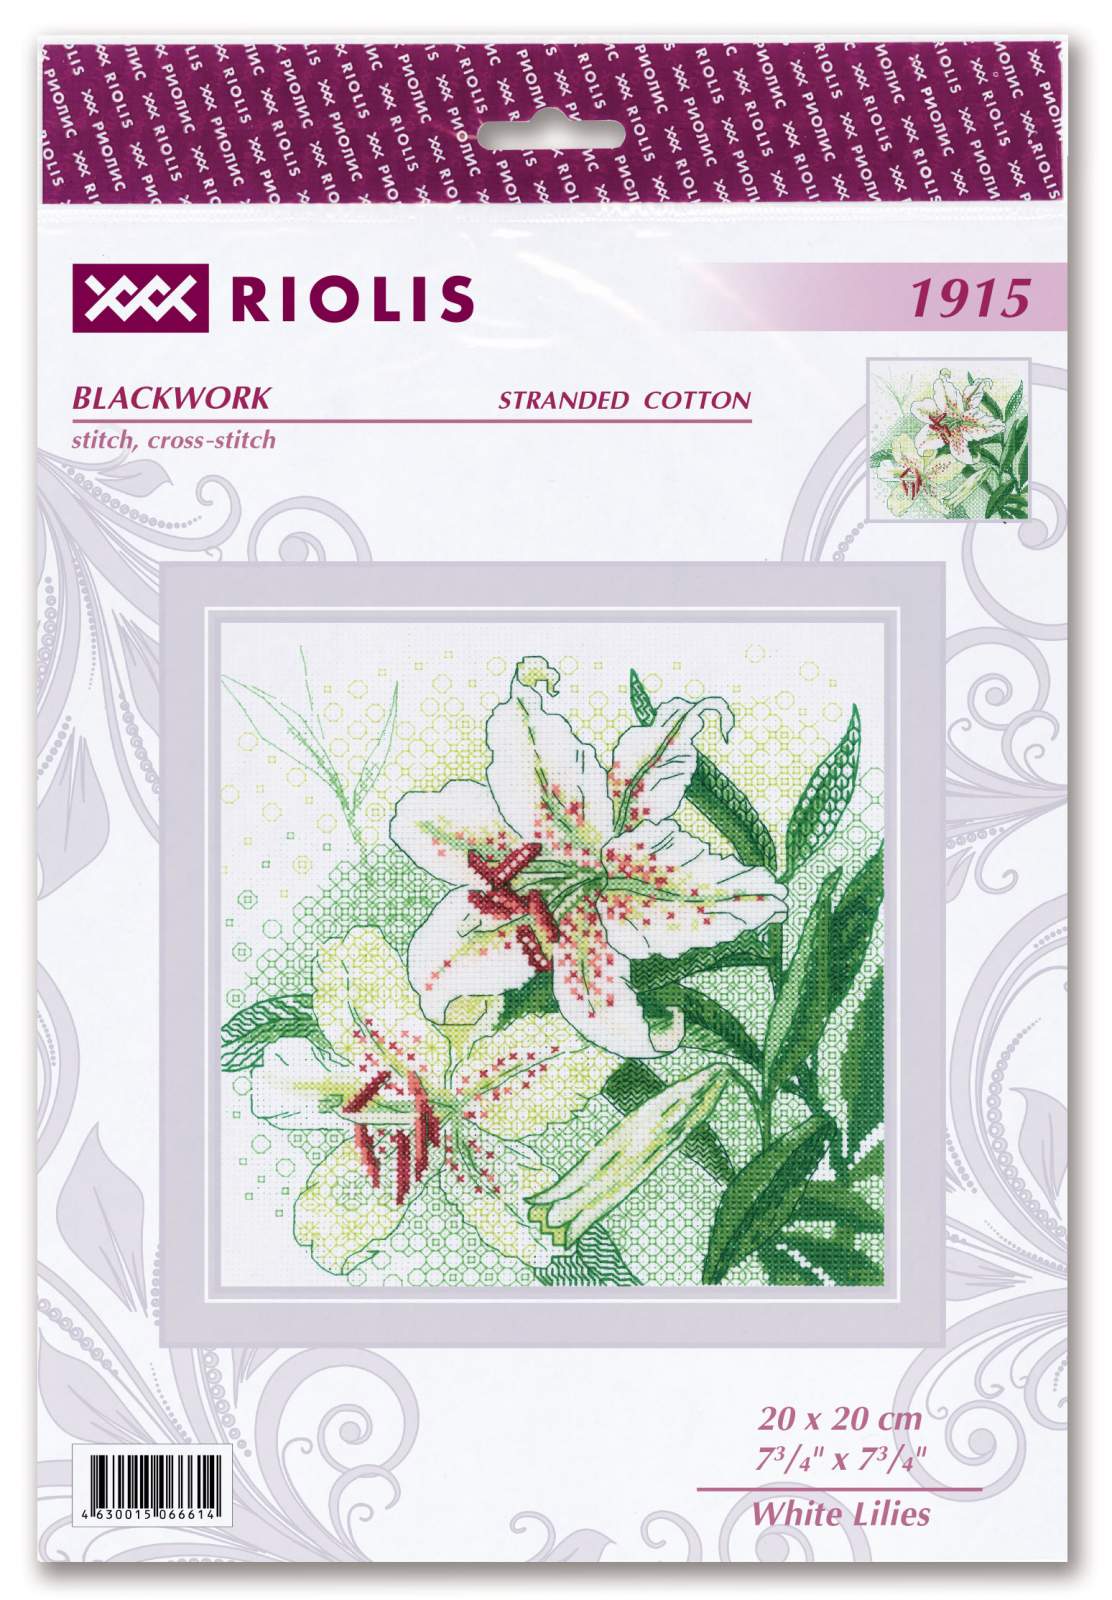 White Lilies counted cross stitch kit